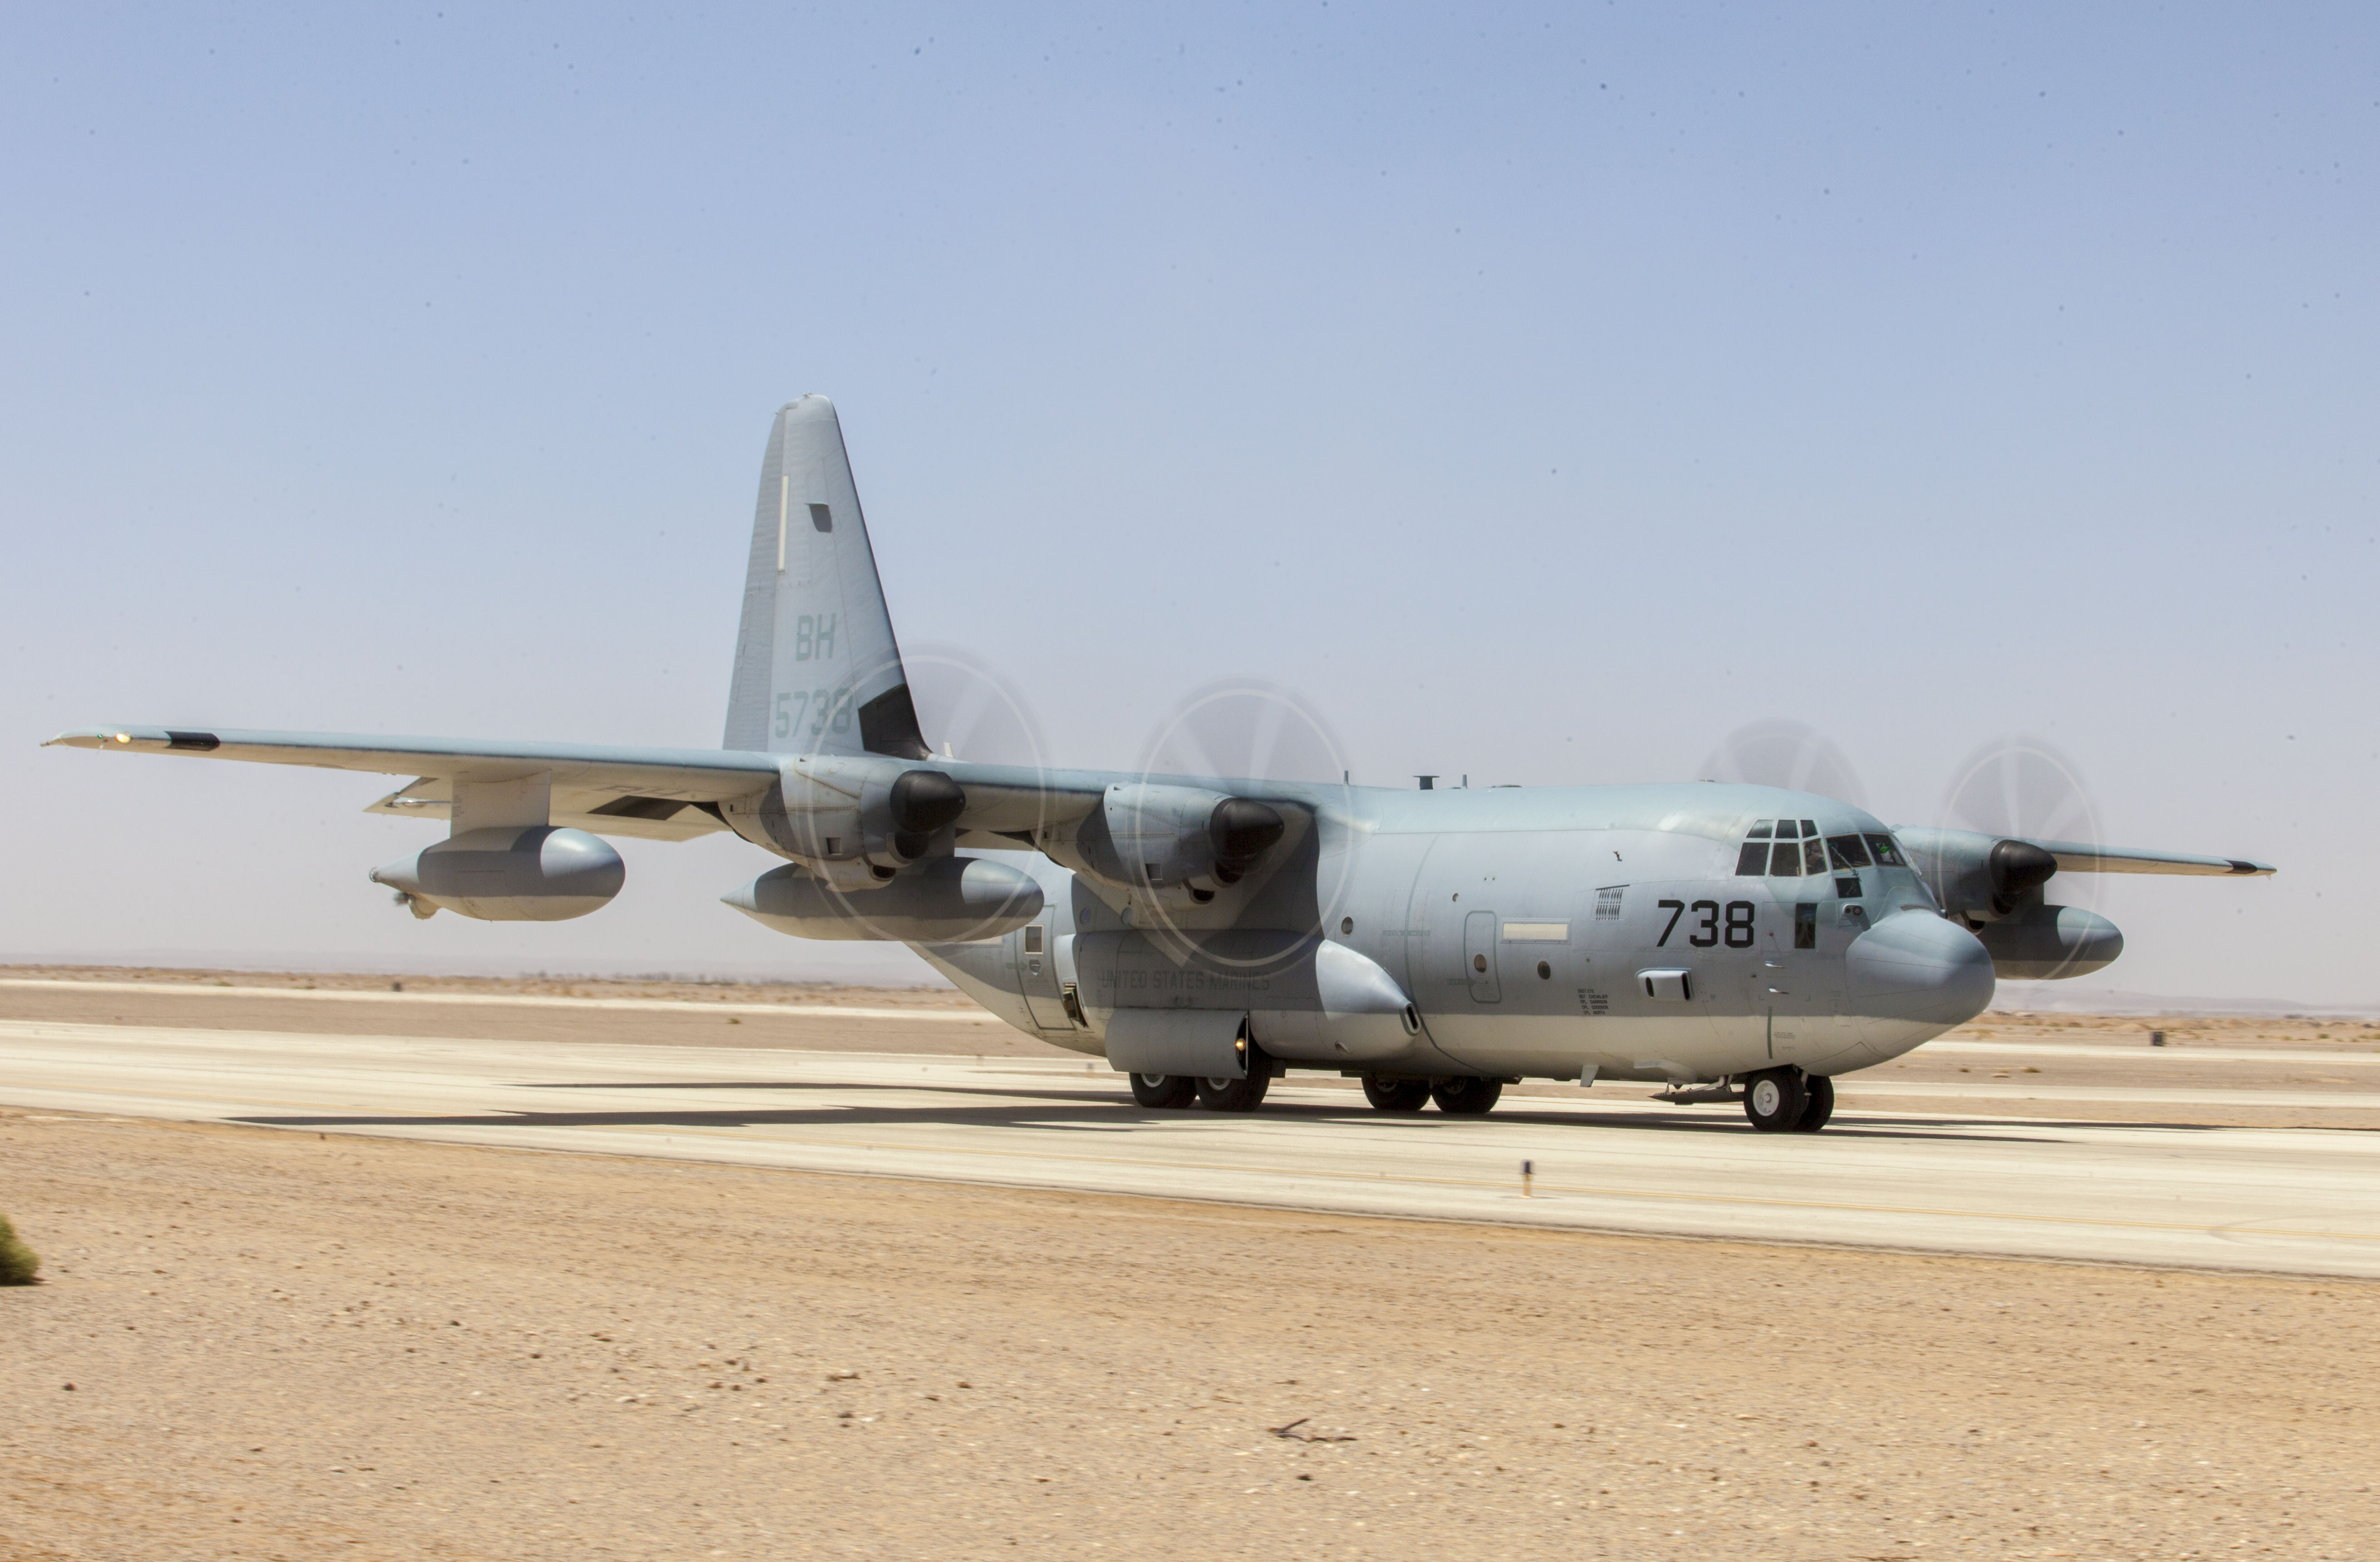 A_U.S._Marine_Corps_KC-130J_Hercules_aircraft_assigned_to_the_command_element_of_the_26th_Marine_Expeditionary_Unit_takes_off_from_King_Faisal_Air_Base_in_Jordan_June_12,_2013,_during_exercise_Eager_Lion_2013_130612-M-SO289-012.jpg